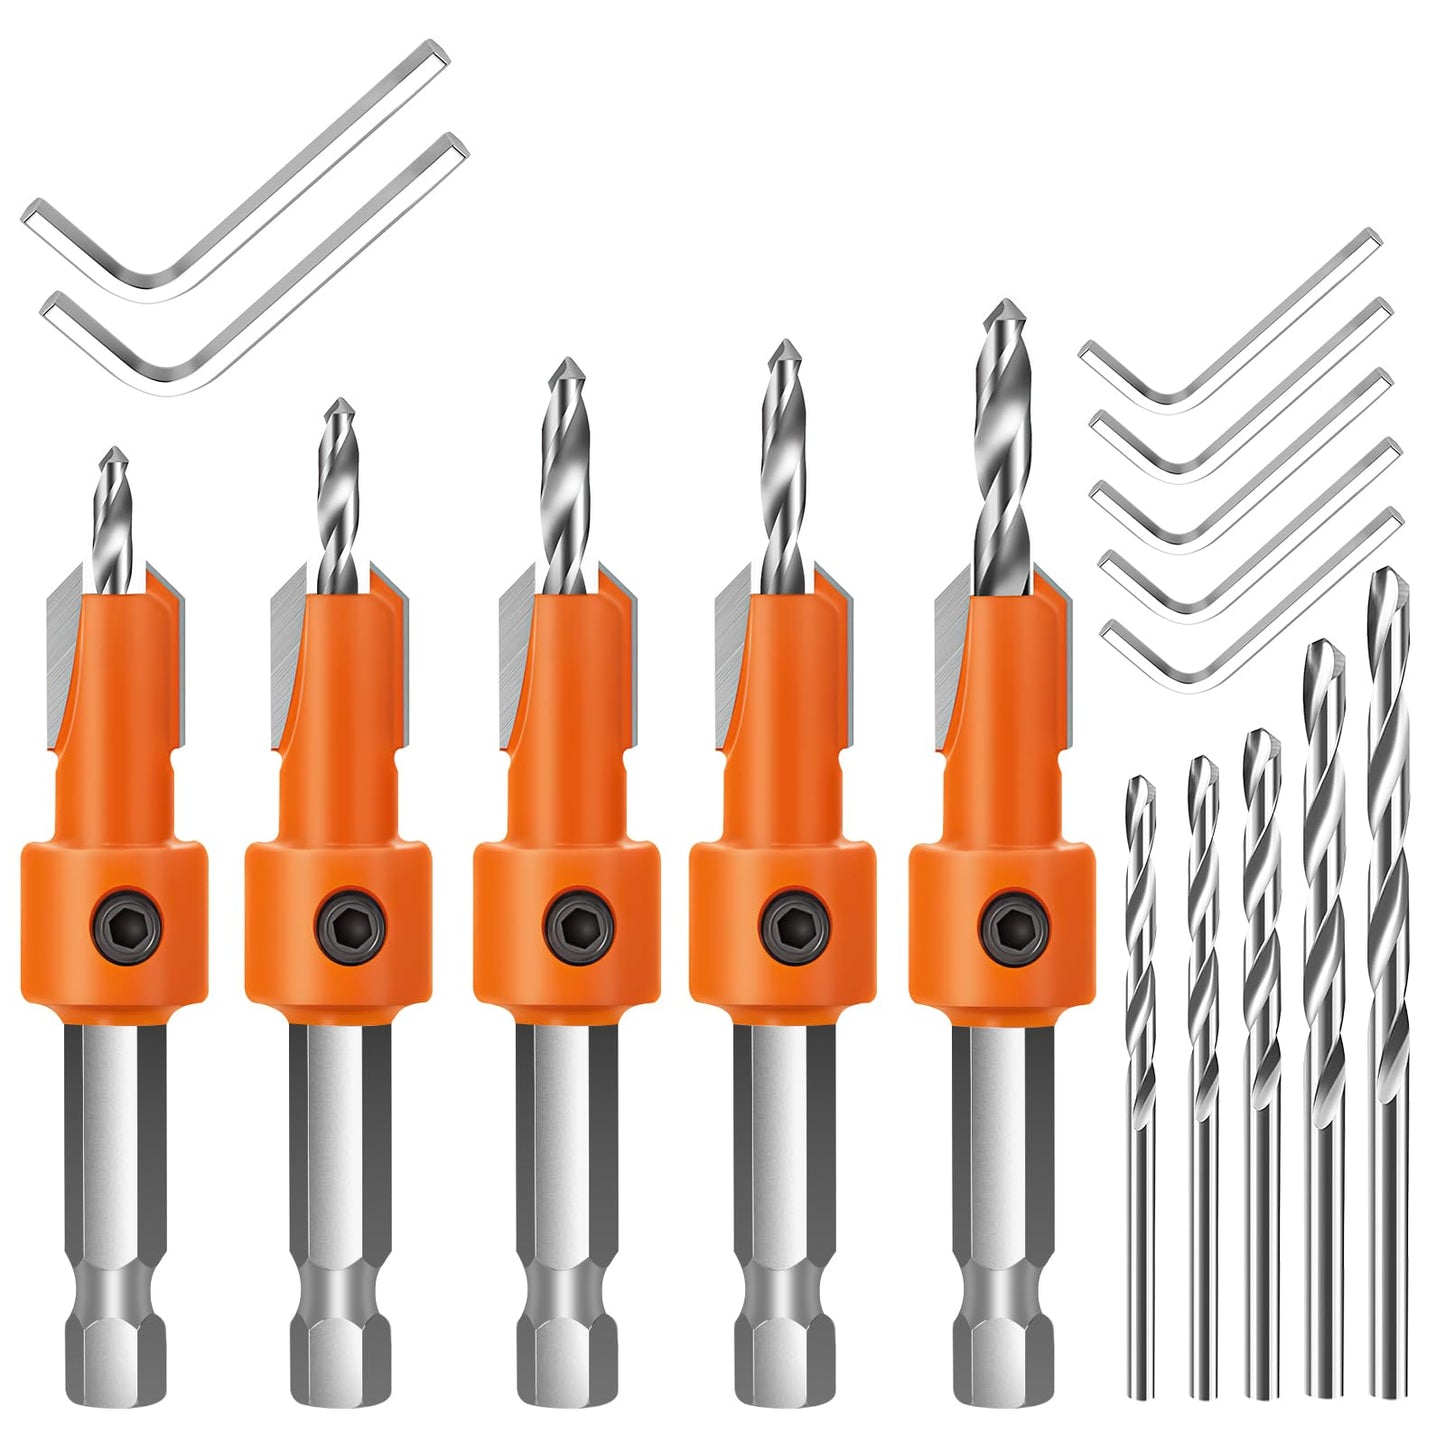 Lytool Countersink Drill Bit Set,5Pcs Counter Sink Drill Bit for Wood,1/4" Hex Shank Tapered Drill Bits for Woodworking and Carpentry,Quick Change